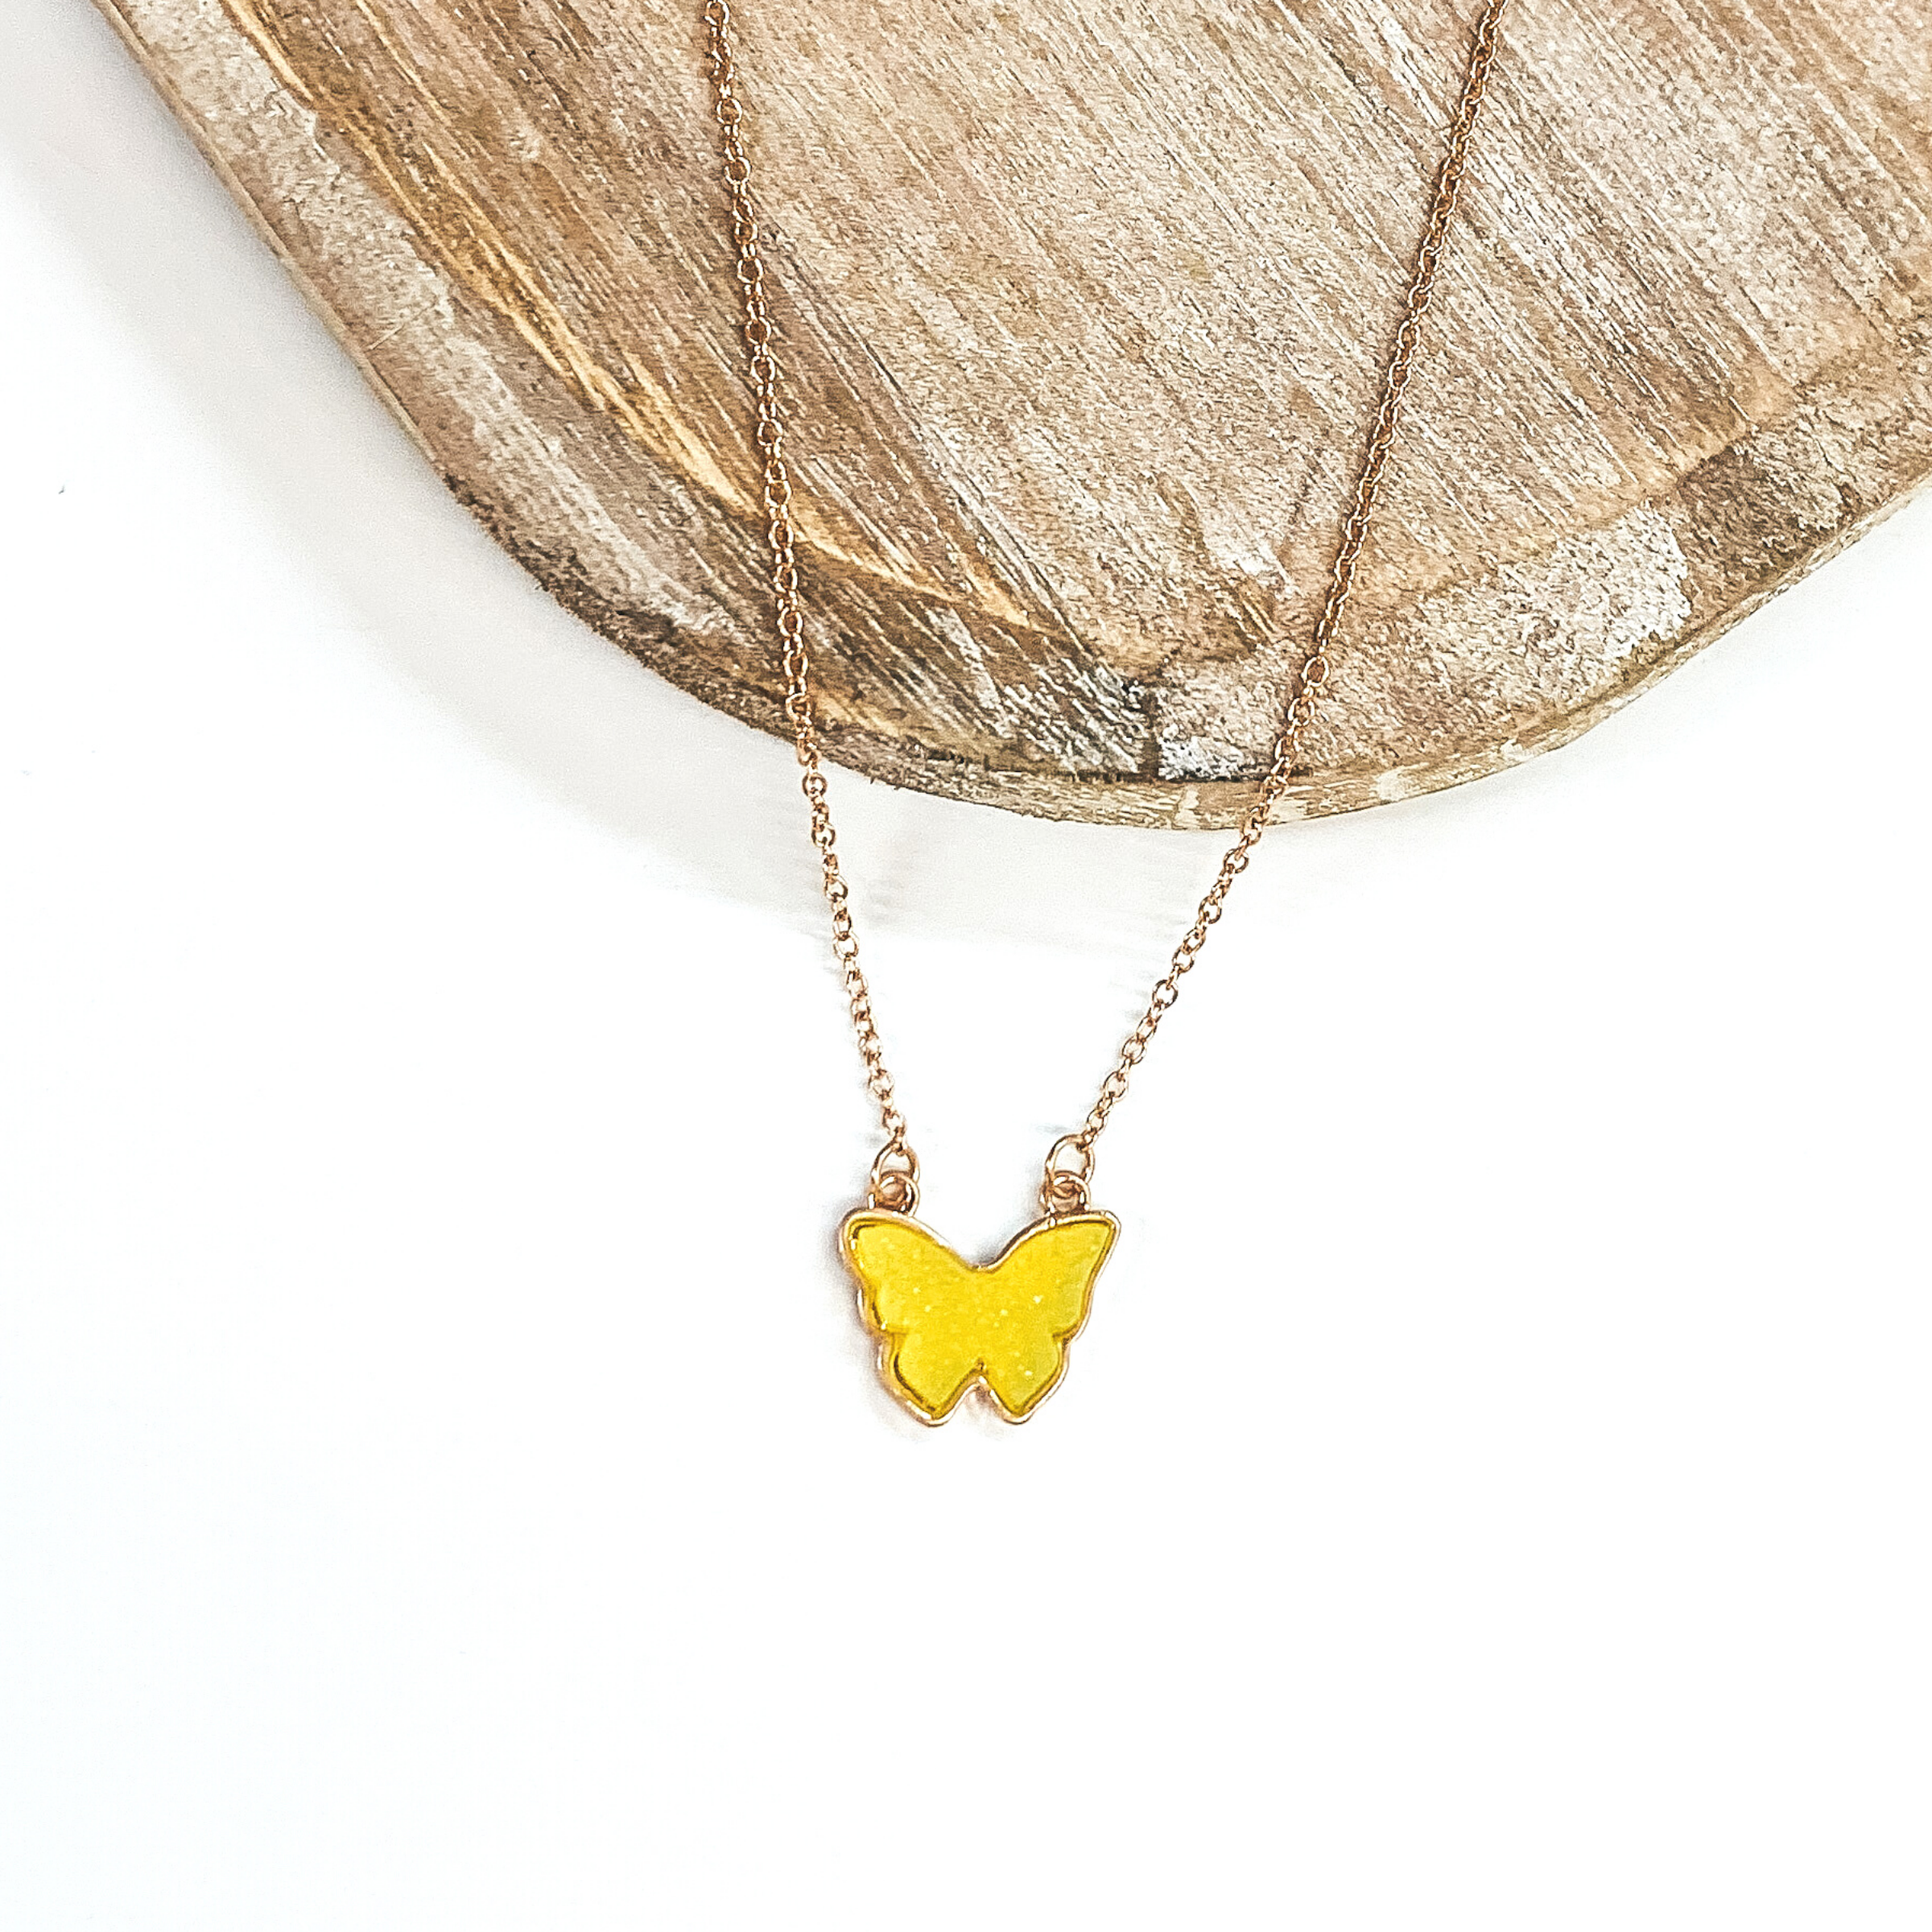 Gold necklace with neon yellow druzy butterfly pendant. Pictured on a white and brown background.